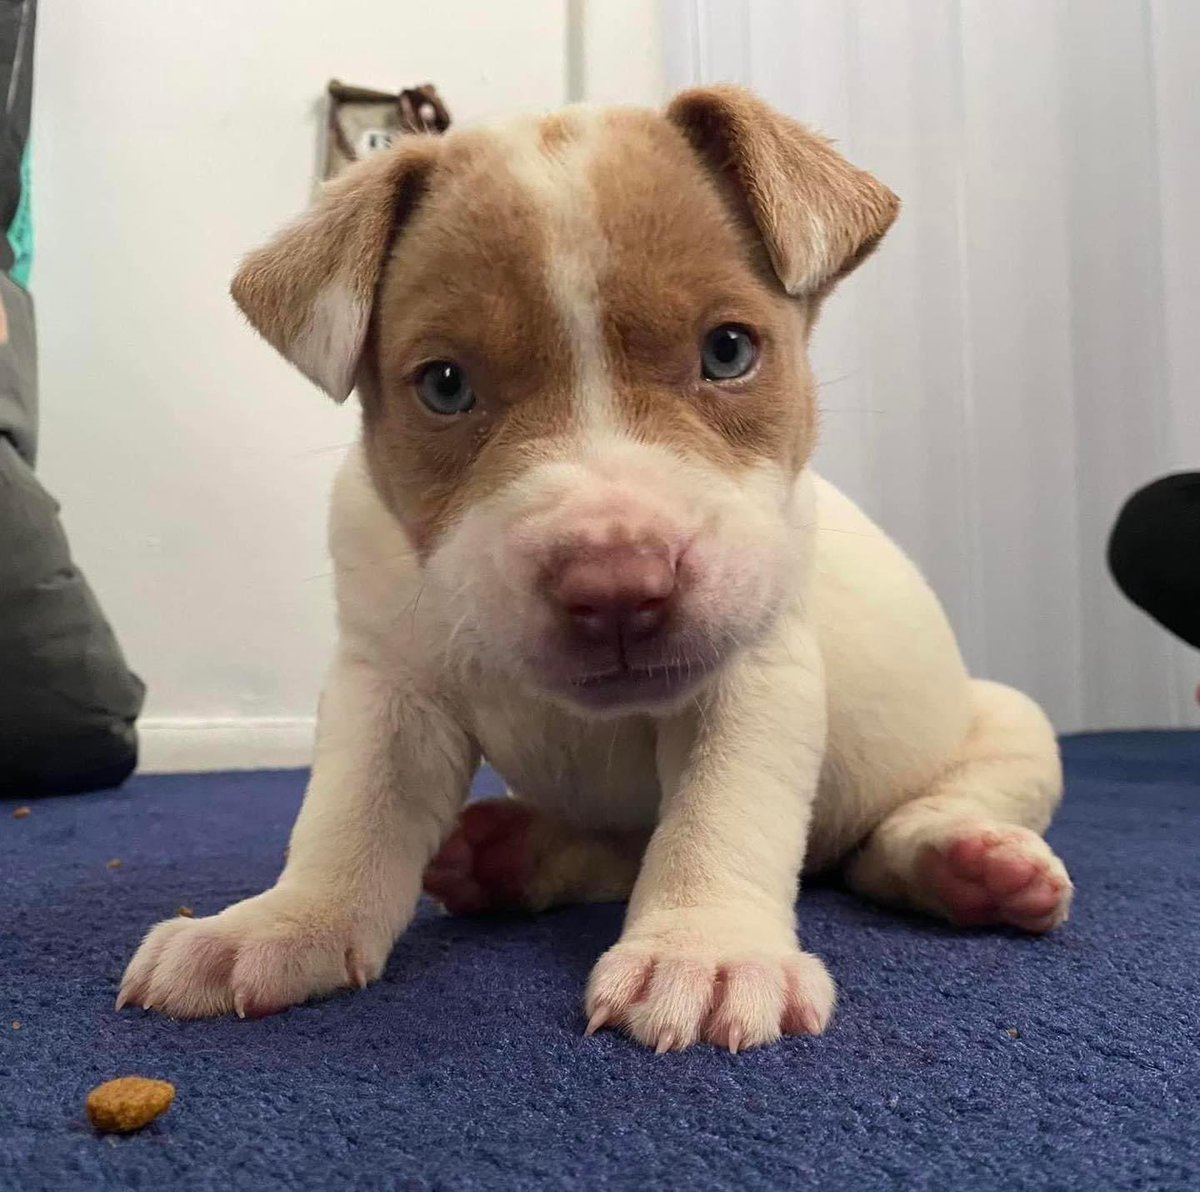 Meet Stitc! 8 week old pit mix loves to play and explore the house. He gives a lot of kisses, gets along with his siblings and with bigger dogs. He loves kids and his face lights up when you walk in the room! To adopt this adorable boy please apply at: coldnosewarmheart.org/dog-applicatio…